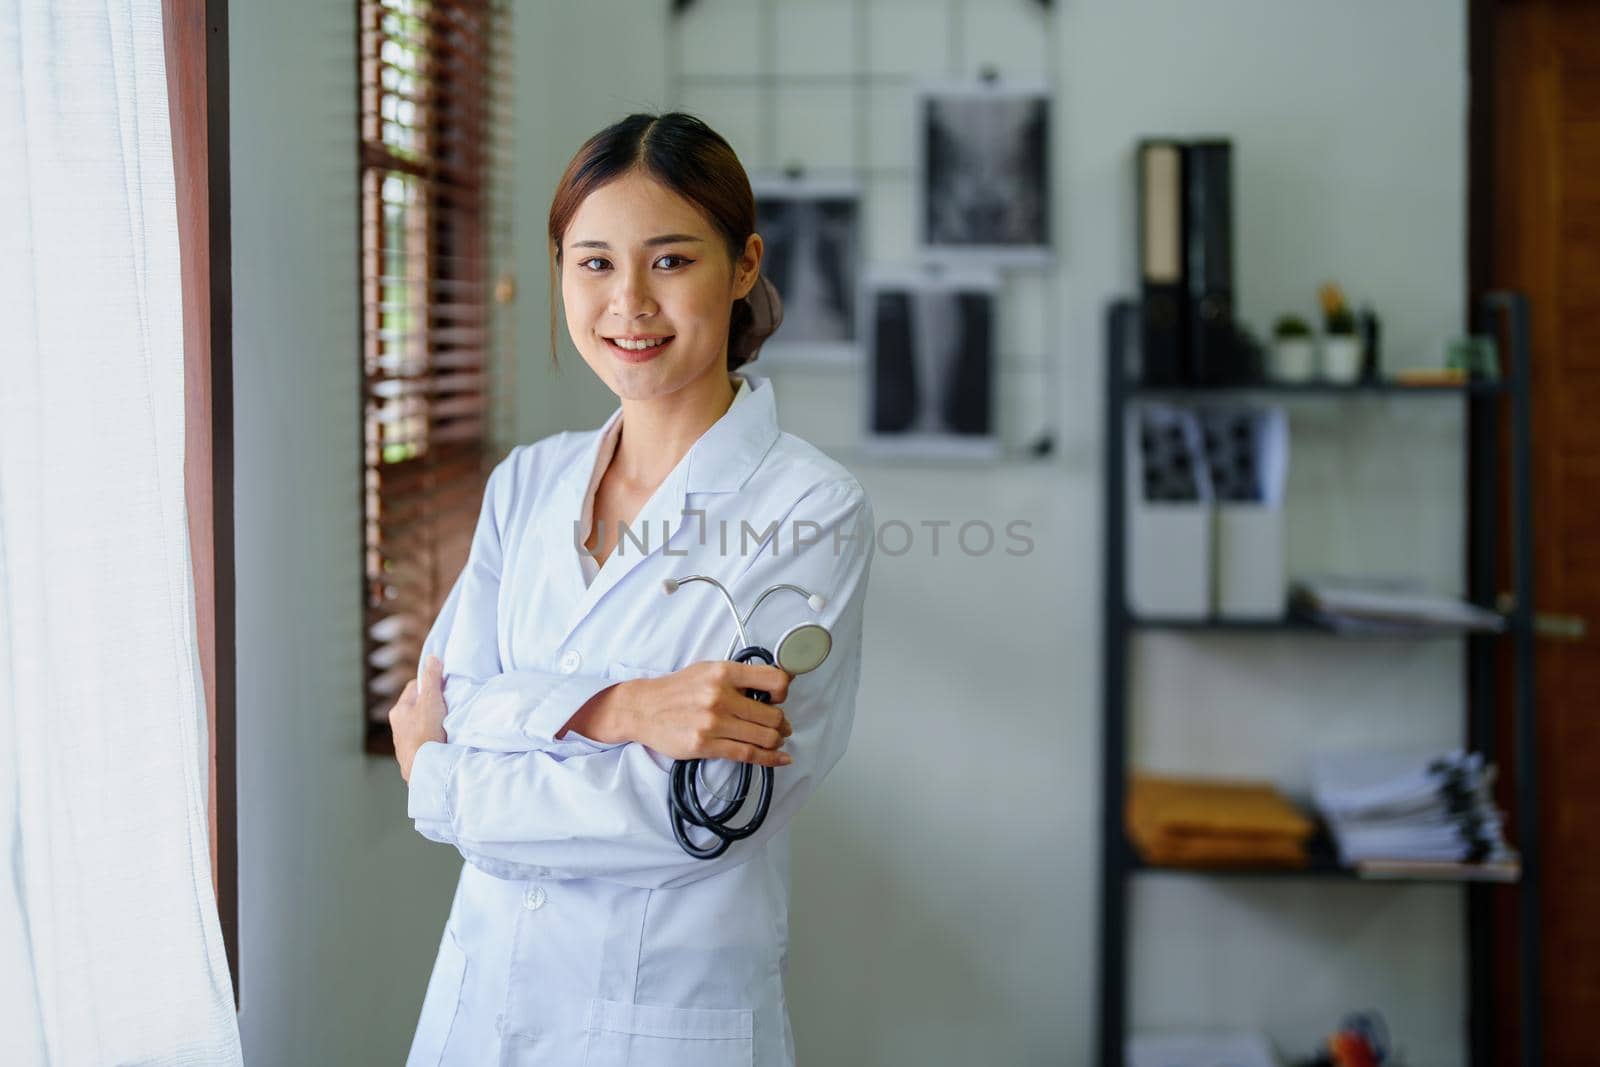 Portrait of an Asian female doctor smiling happily holding a stethoscope after a break from work.